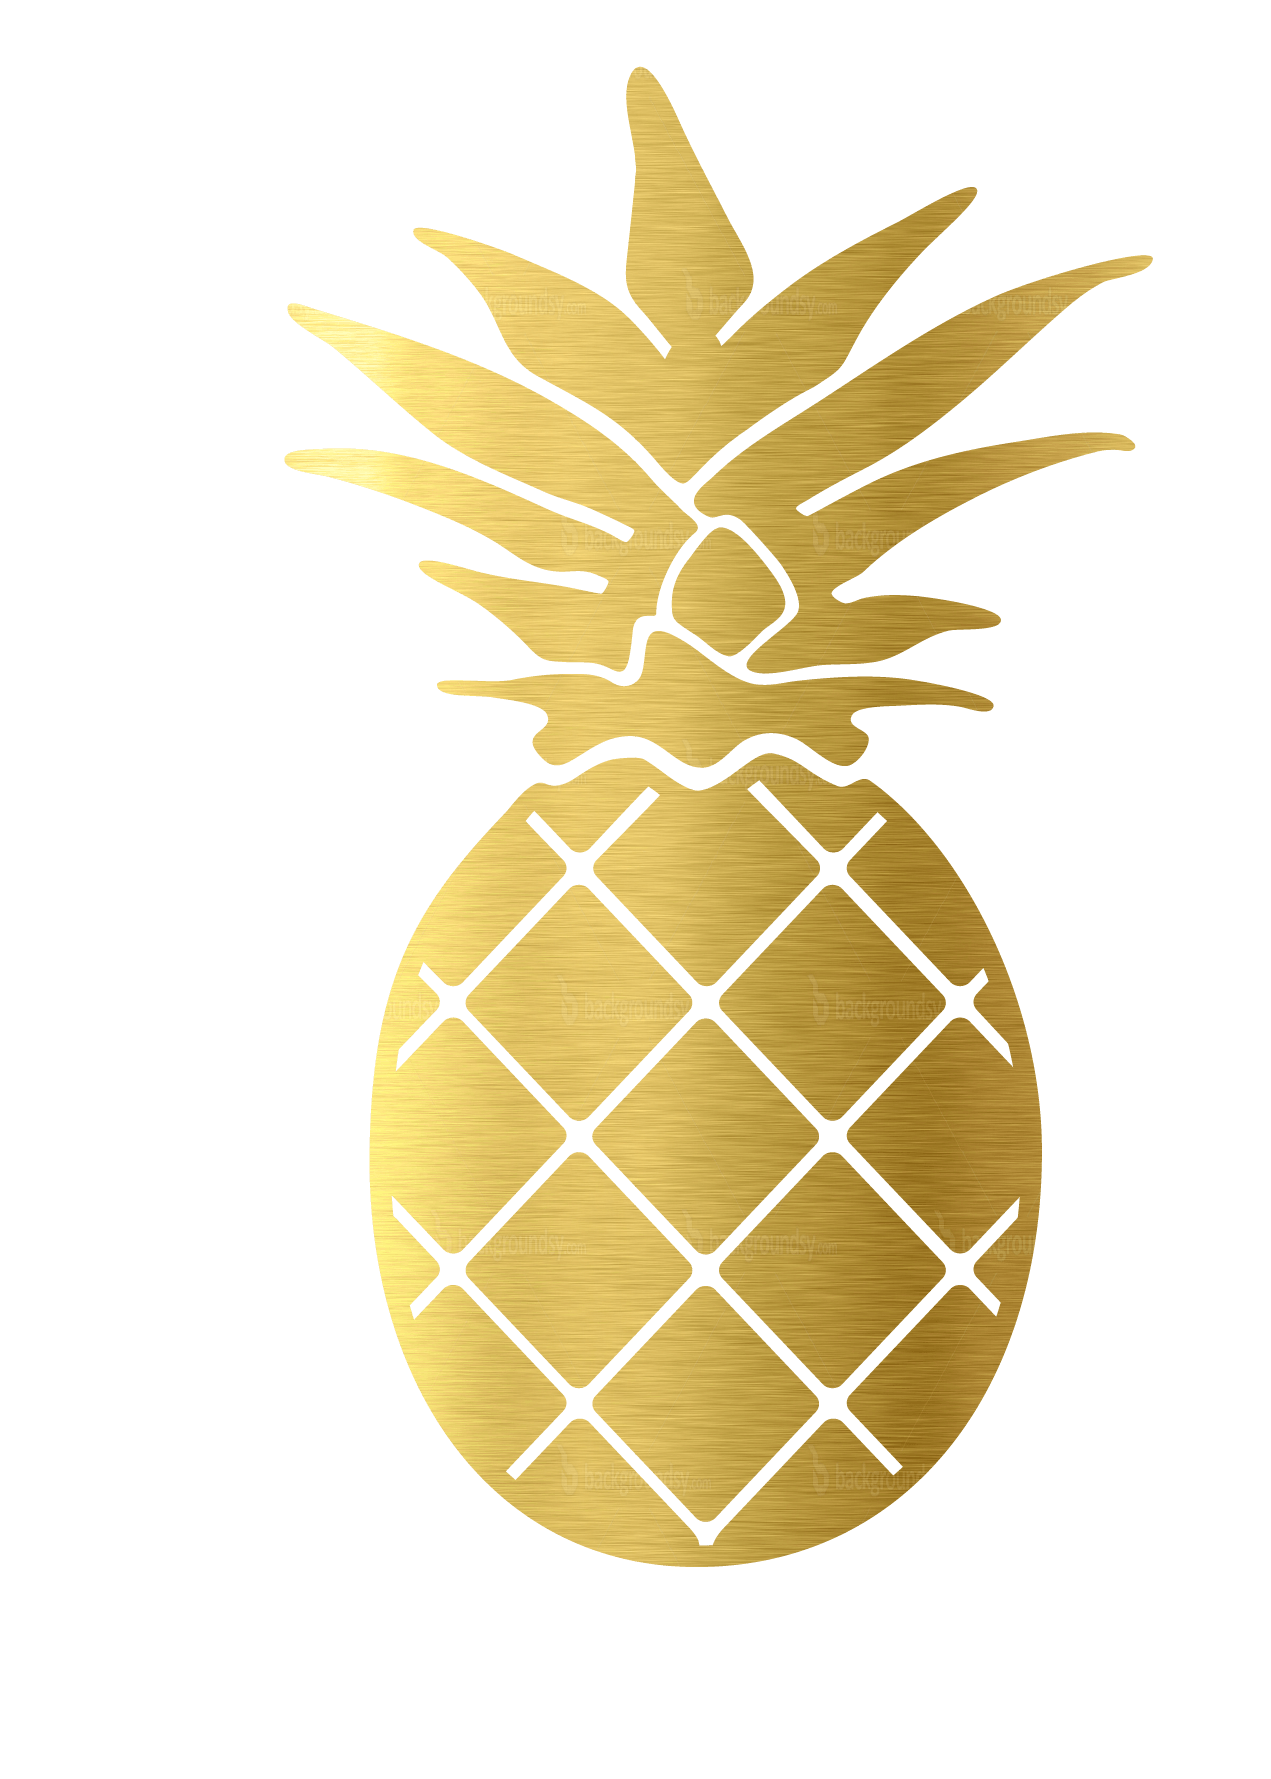 Sunglasses clipart pineapple. Decals stickers palmetto moon